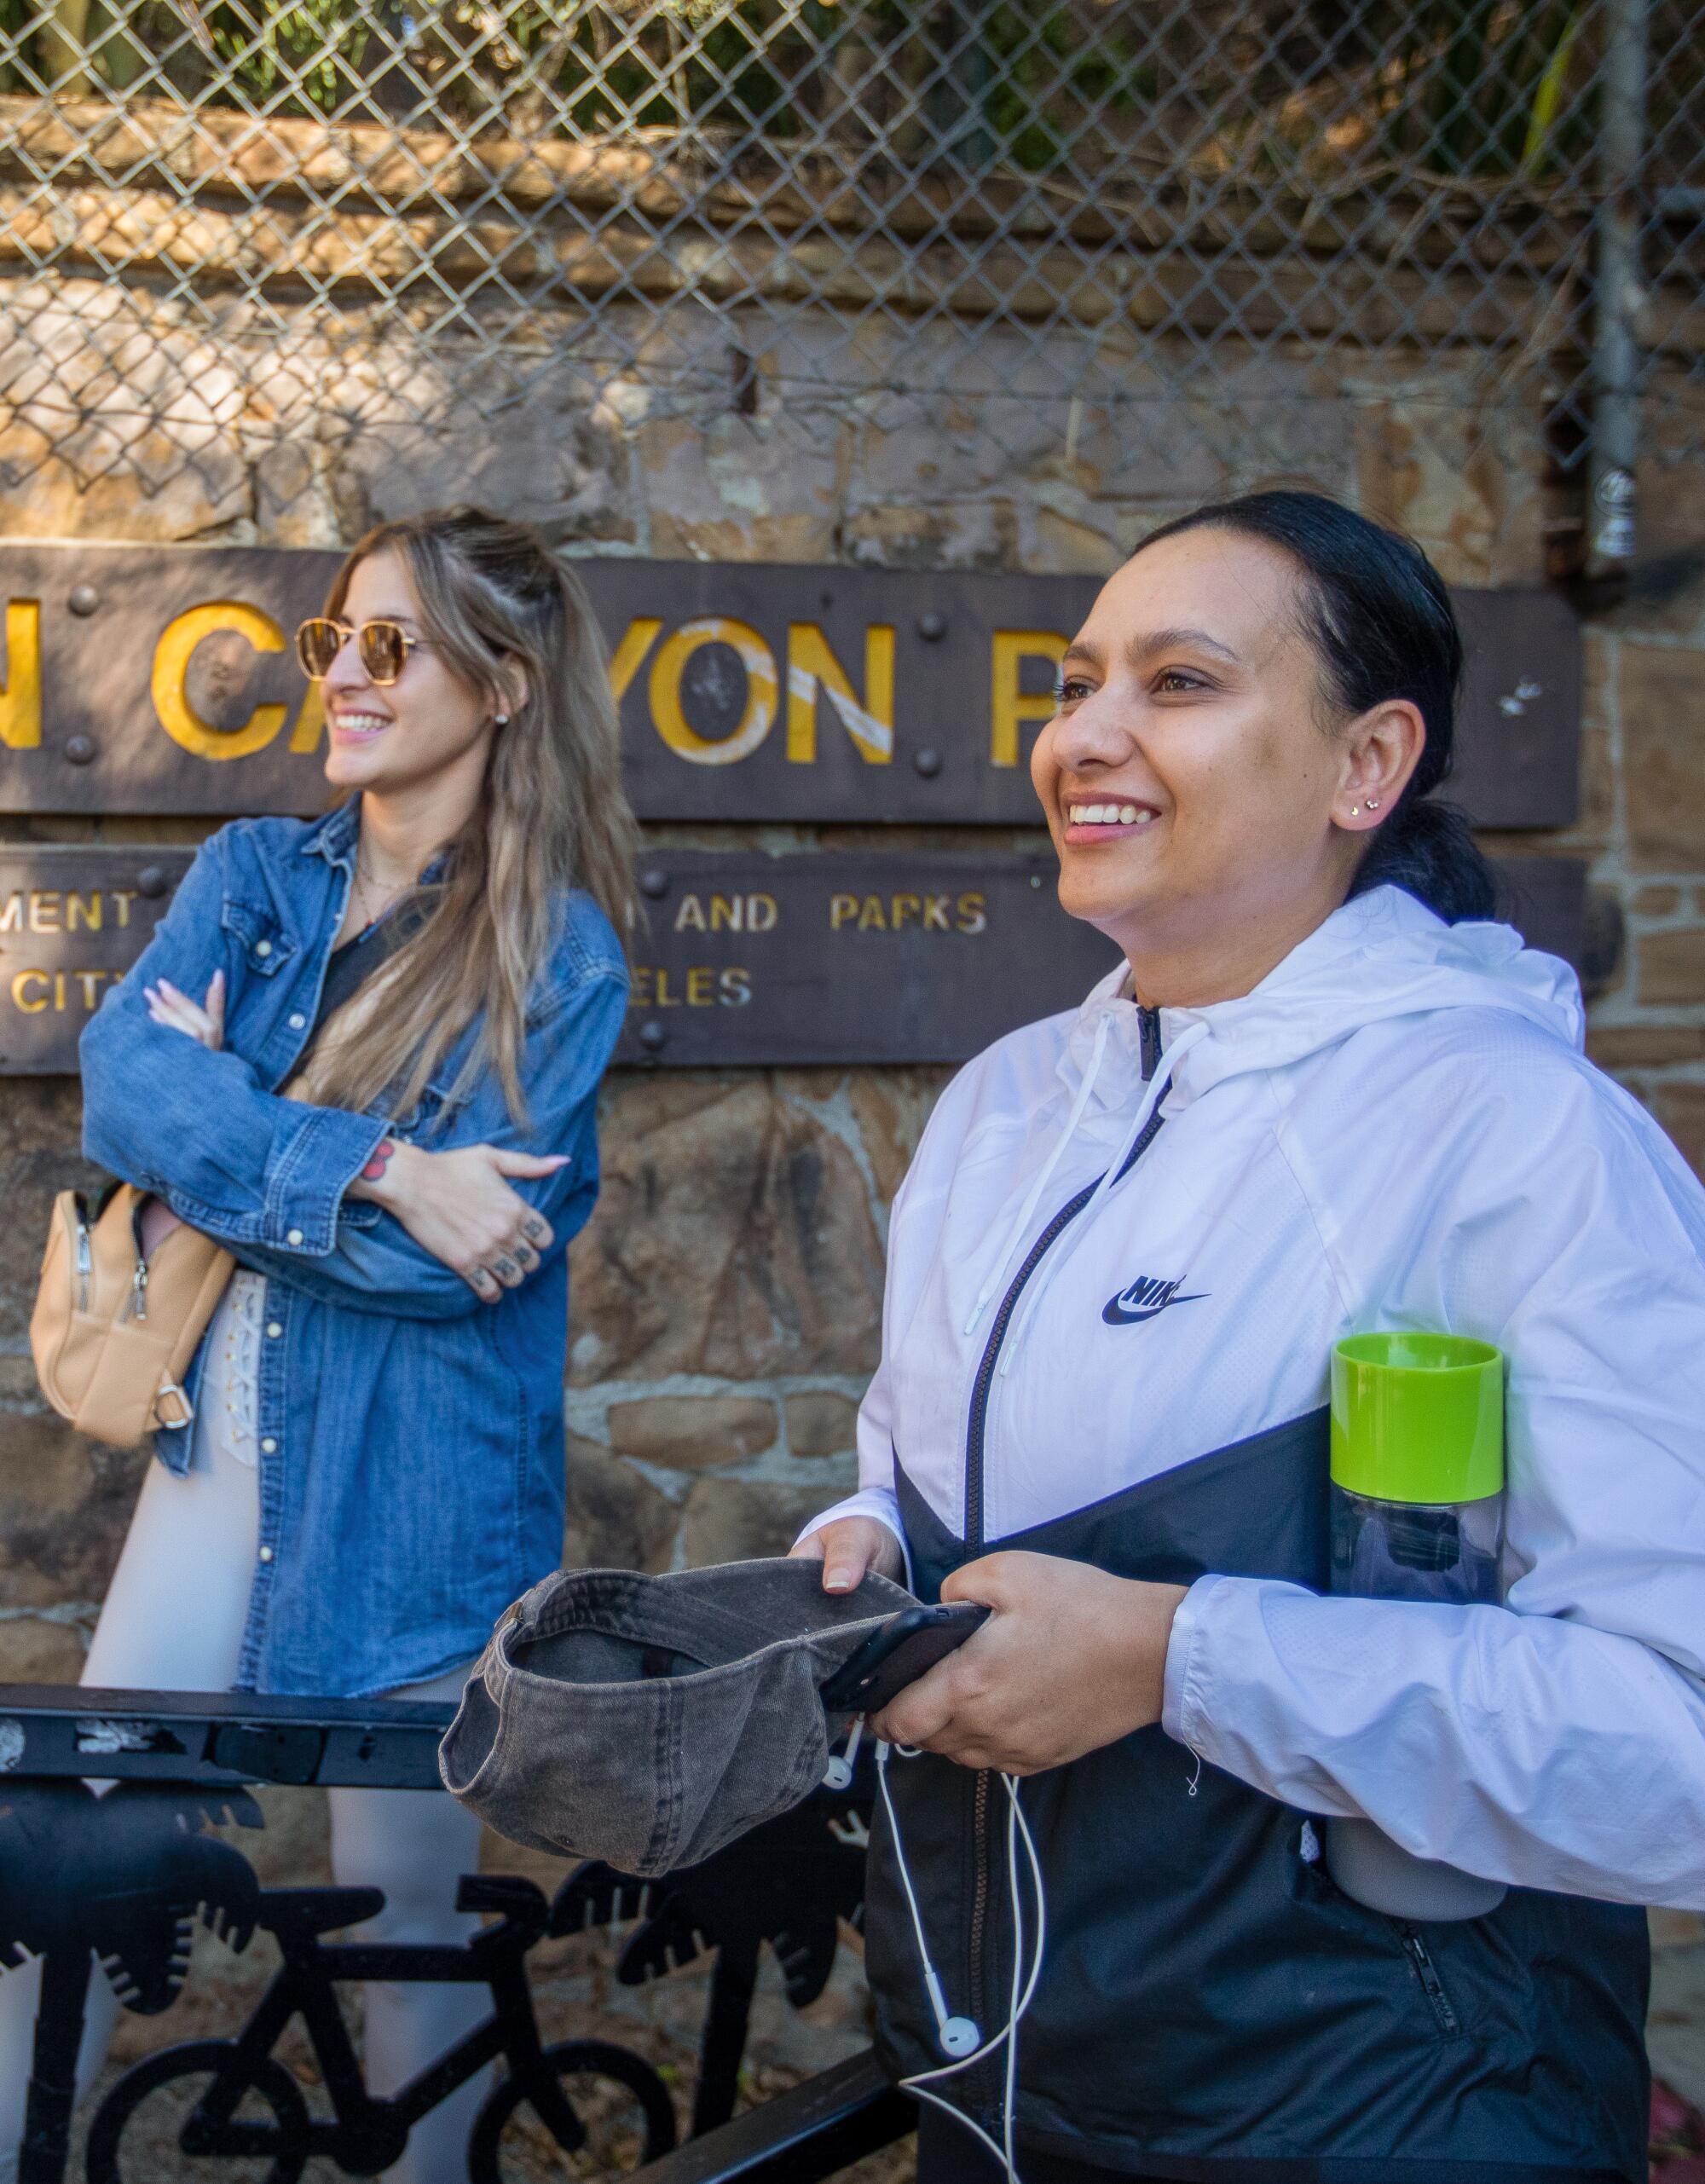 Two women in athletic clothing stand talking with others off-camera in front of a sign for Runyon Canyon Park. 